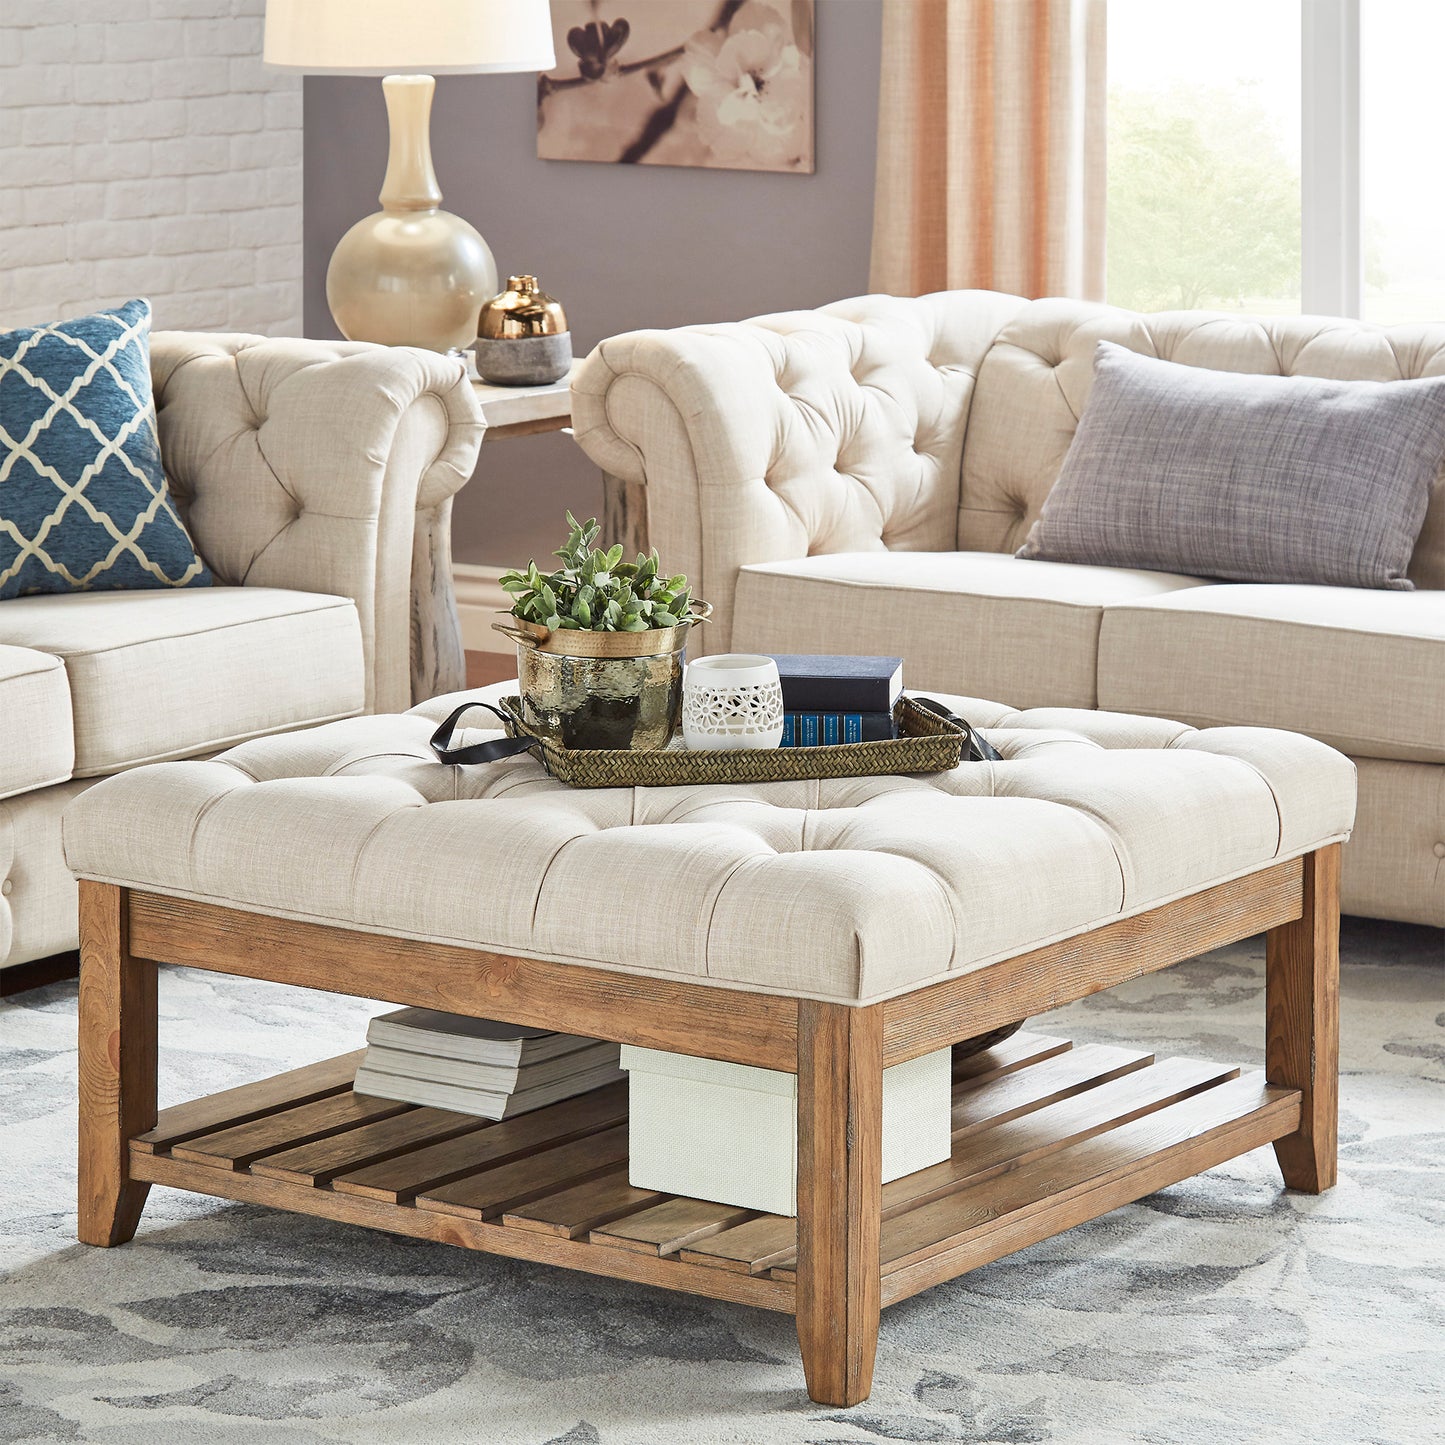 Pine Planked Storage Ottoman Coffee Table - Beige Linen, Dimpled Tufted